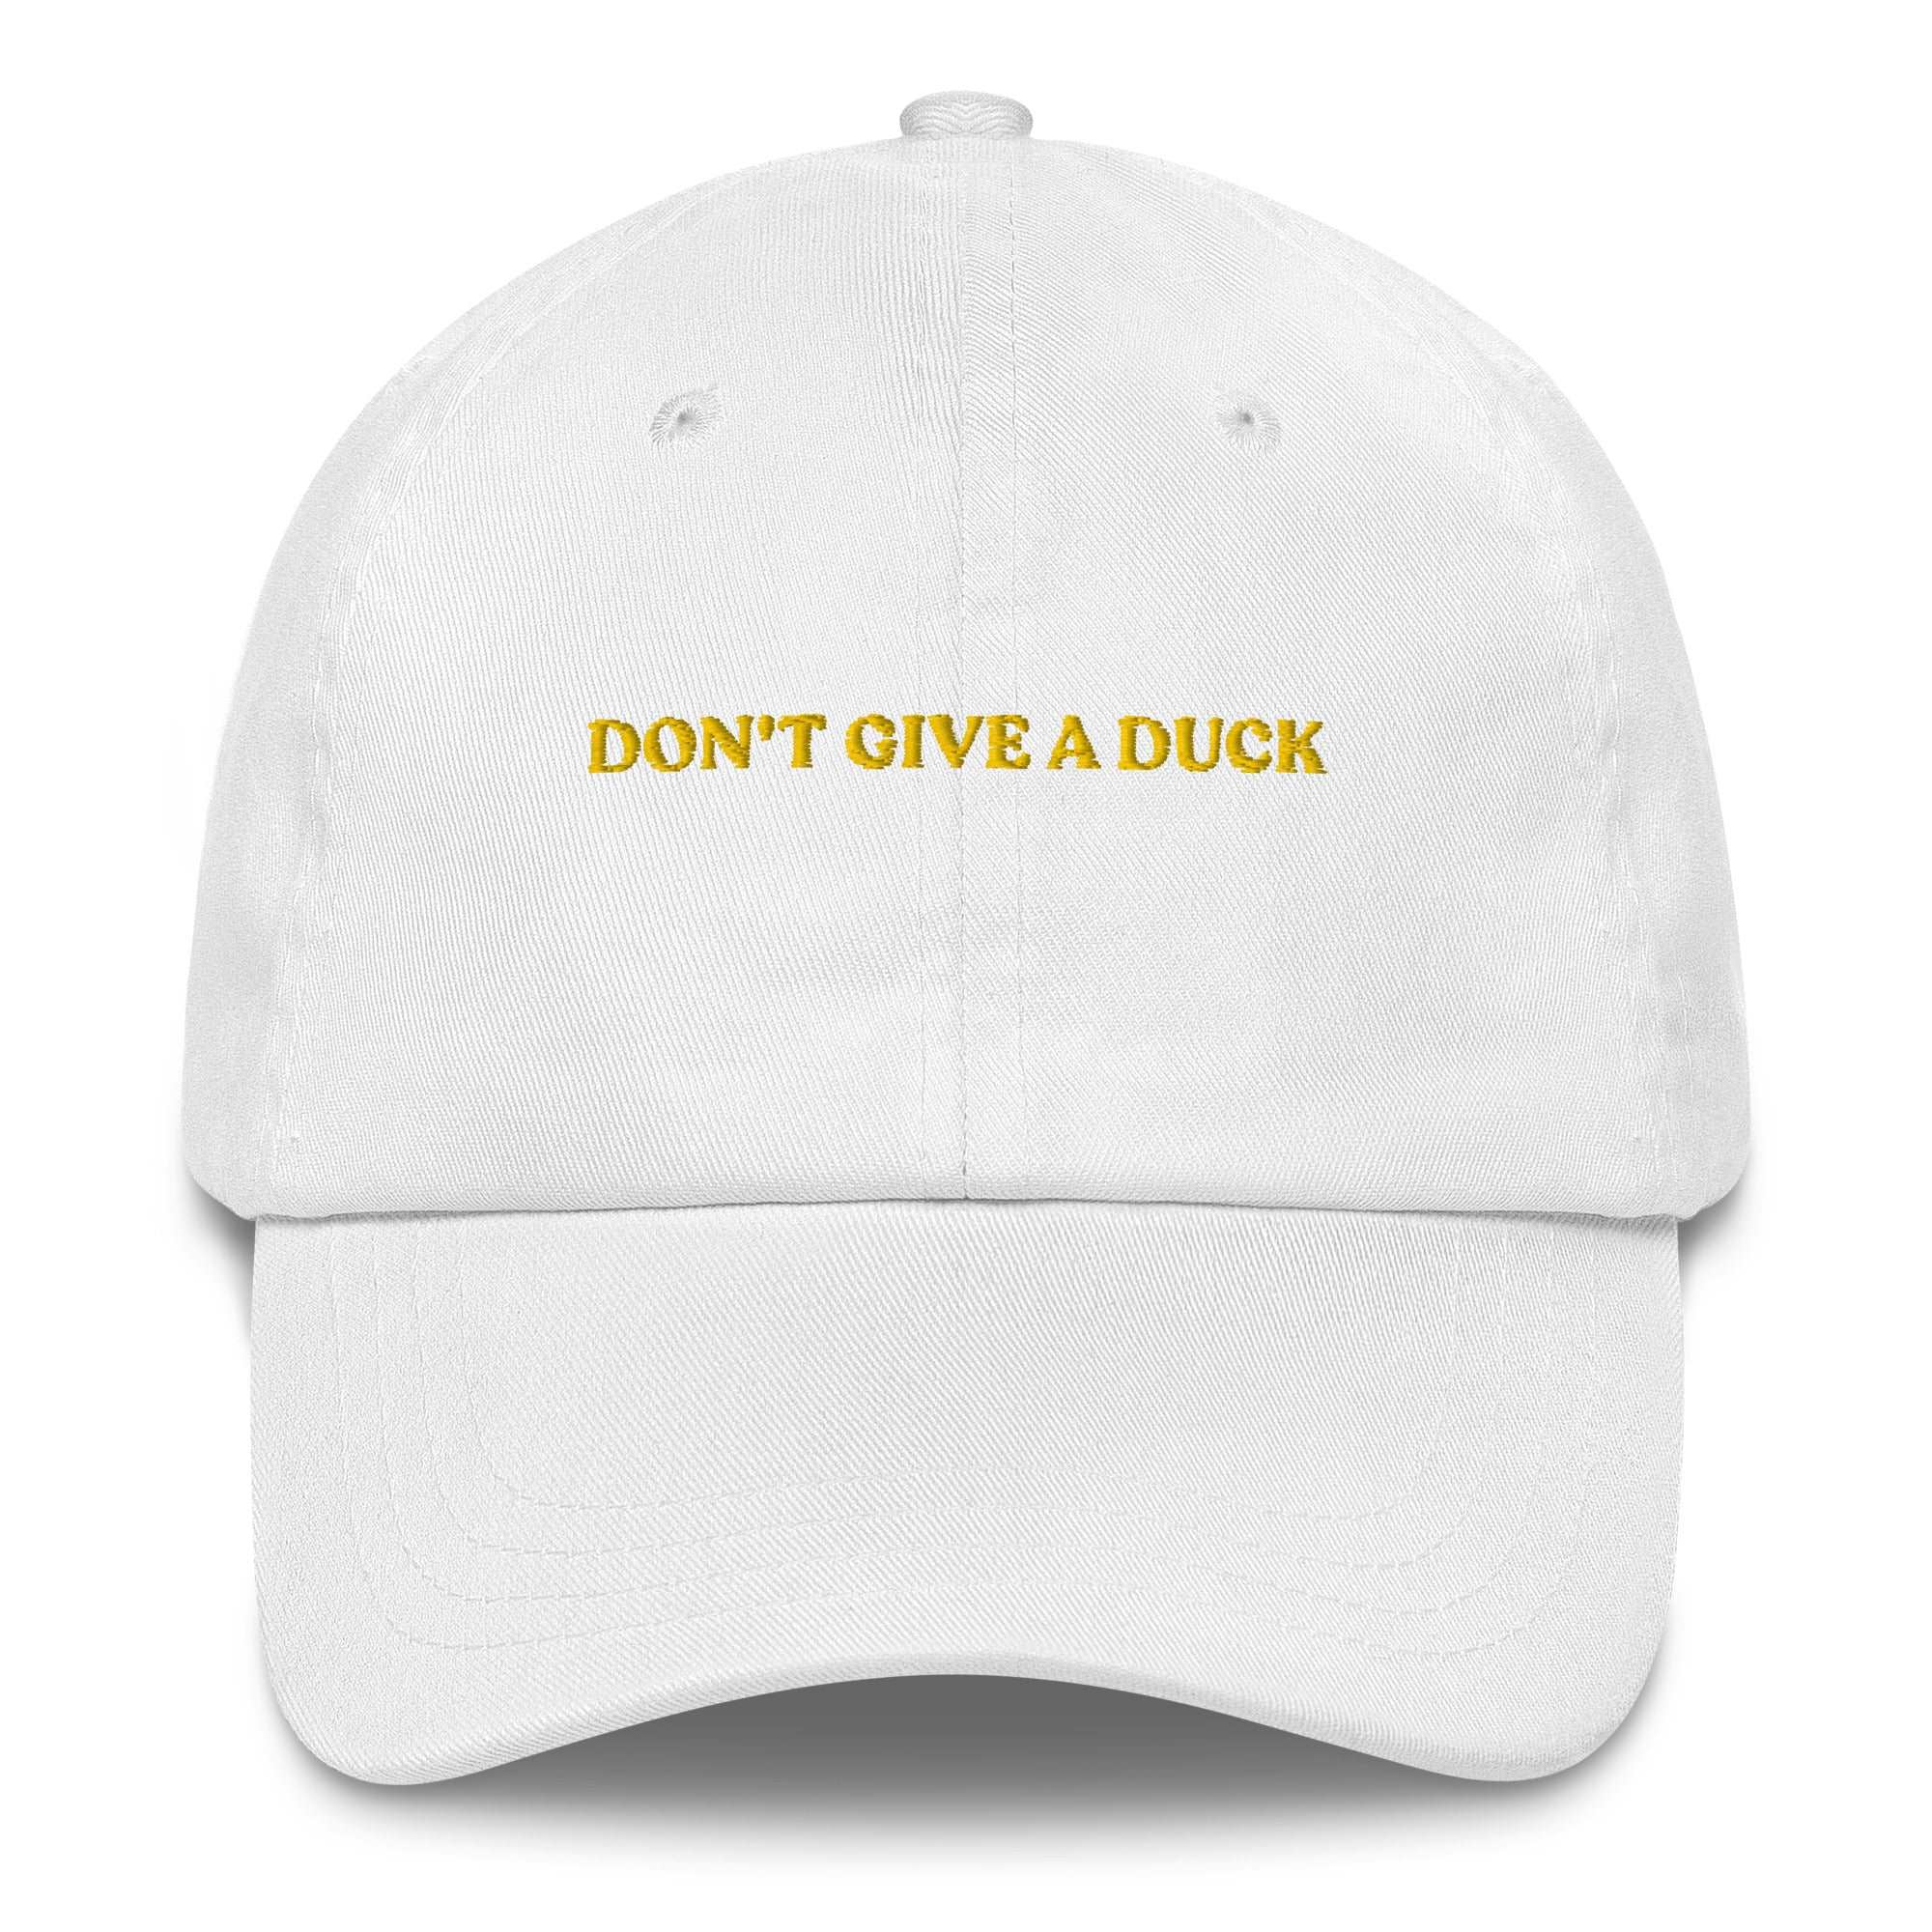 Don't give a duck